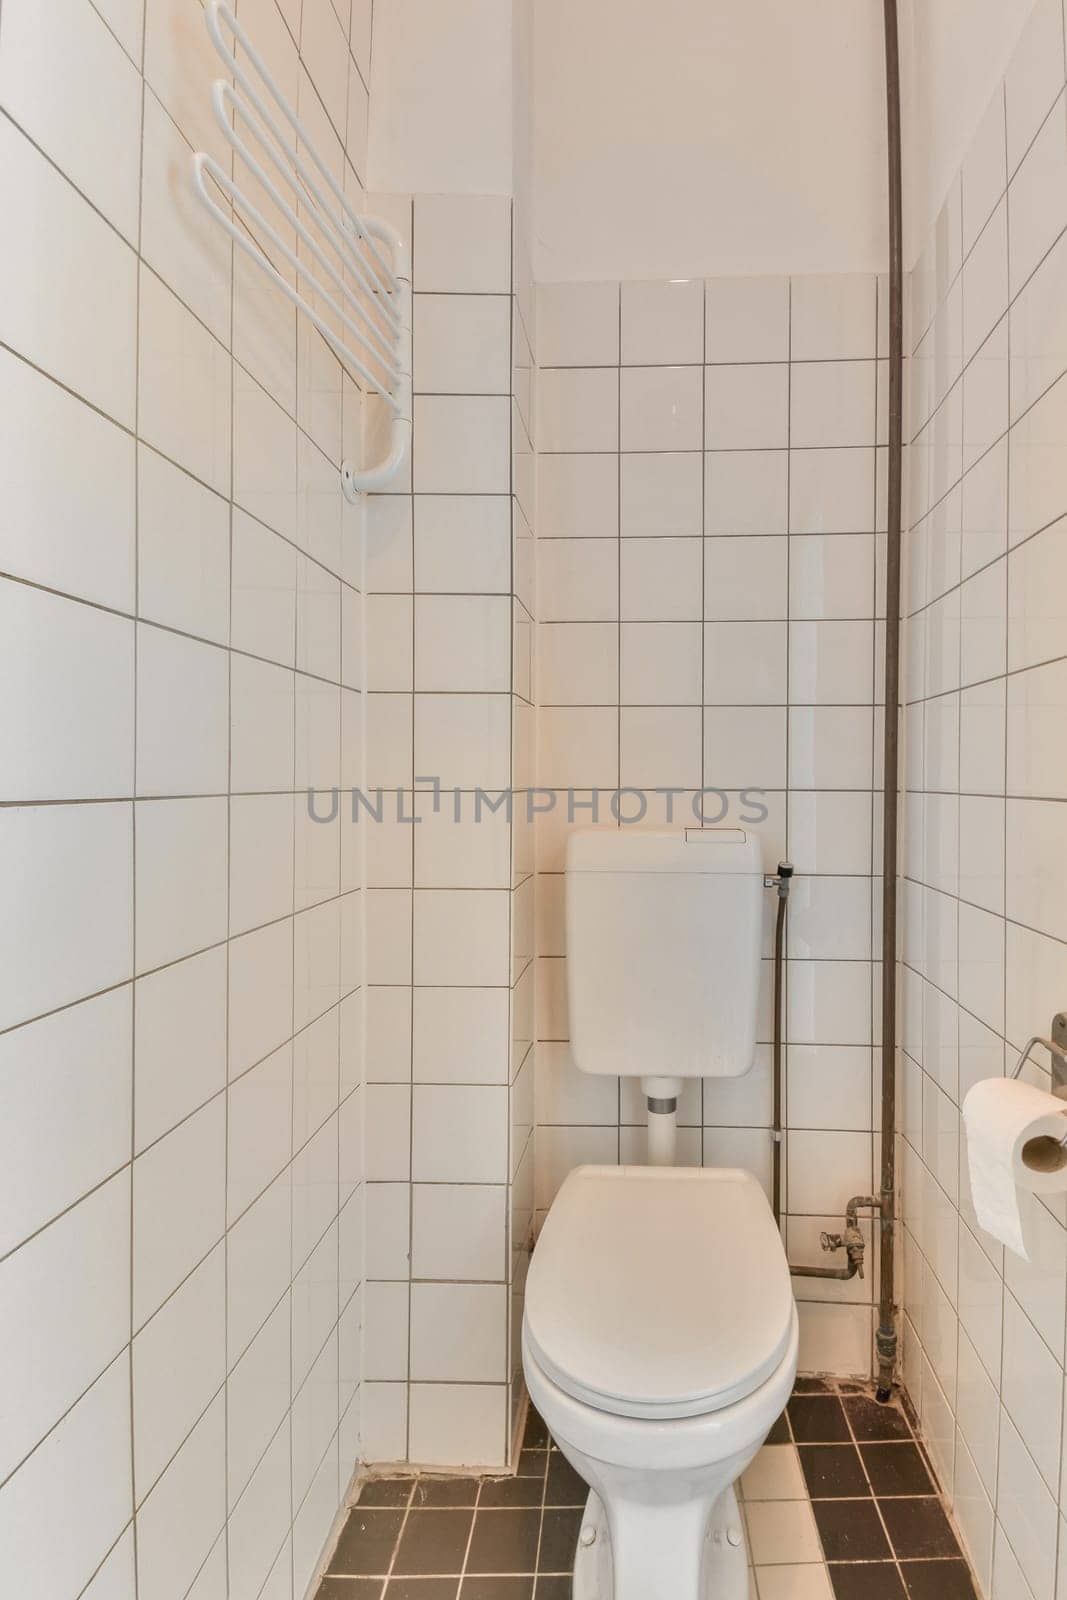 a white toilet in a small bathroom with tiled walls and black tiles on the floor, there is a mirror above it